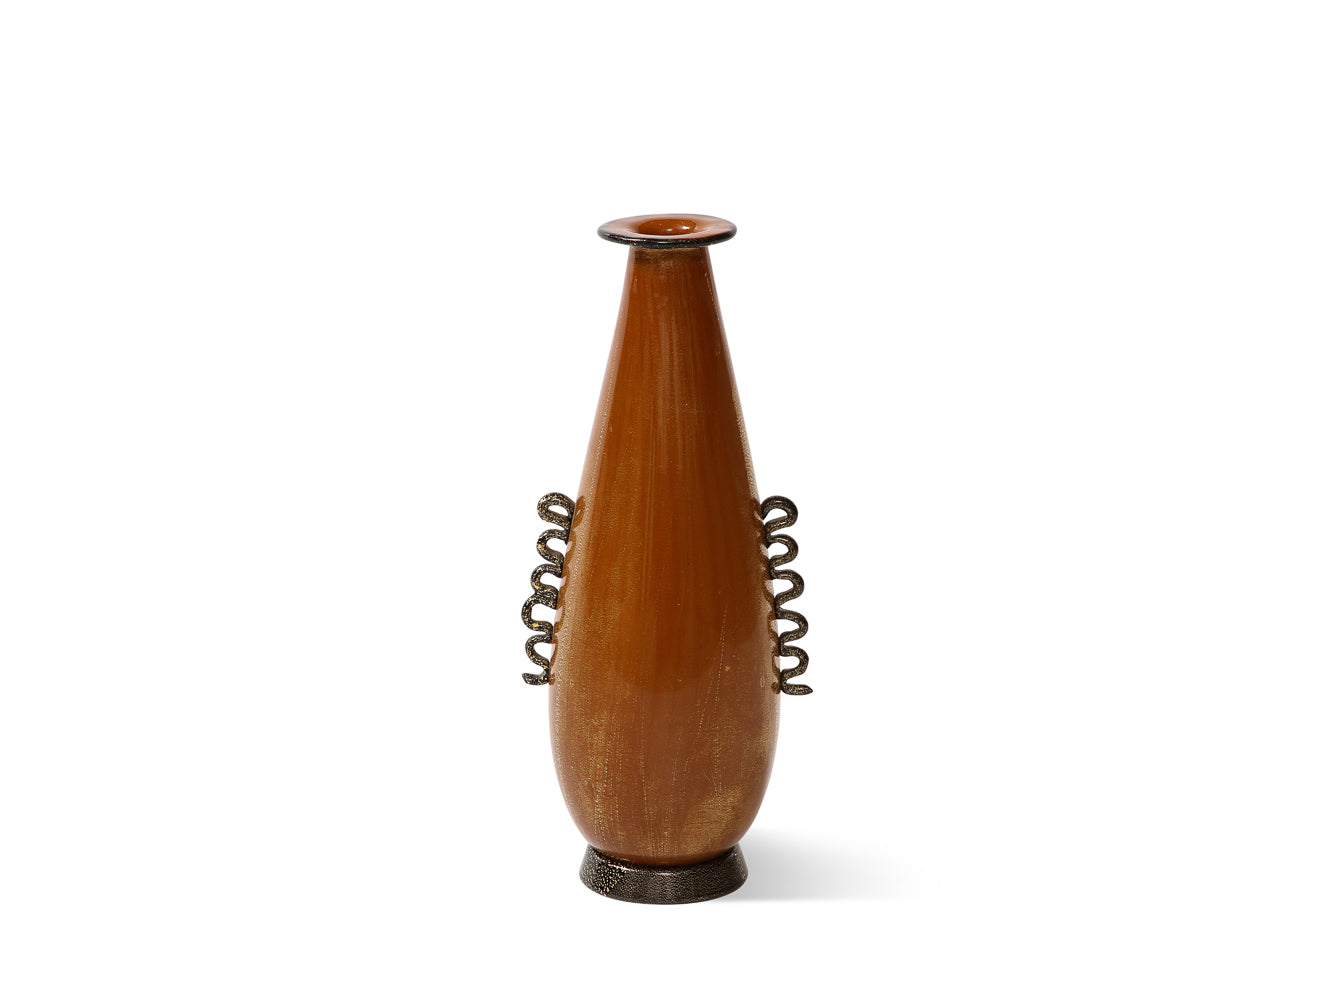 Hand Blown Murano Glass Vase by Ermanno Nason for Cenedese